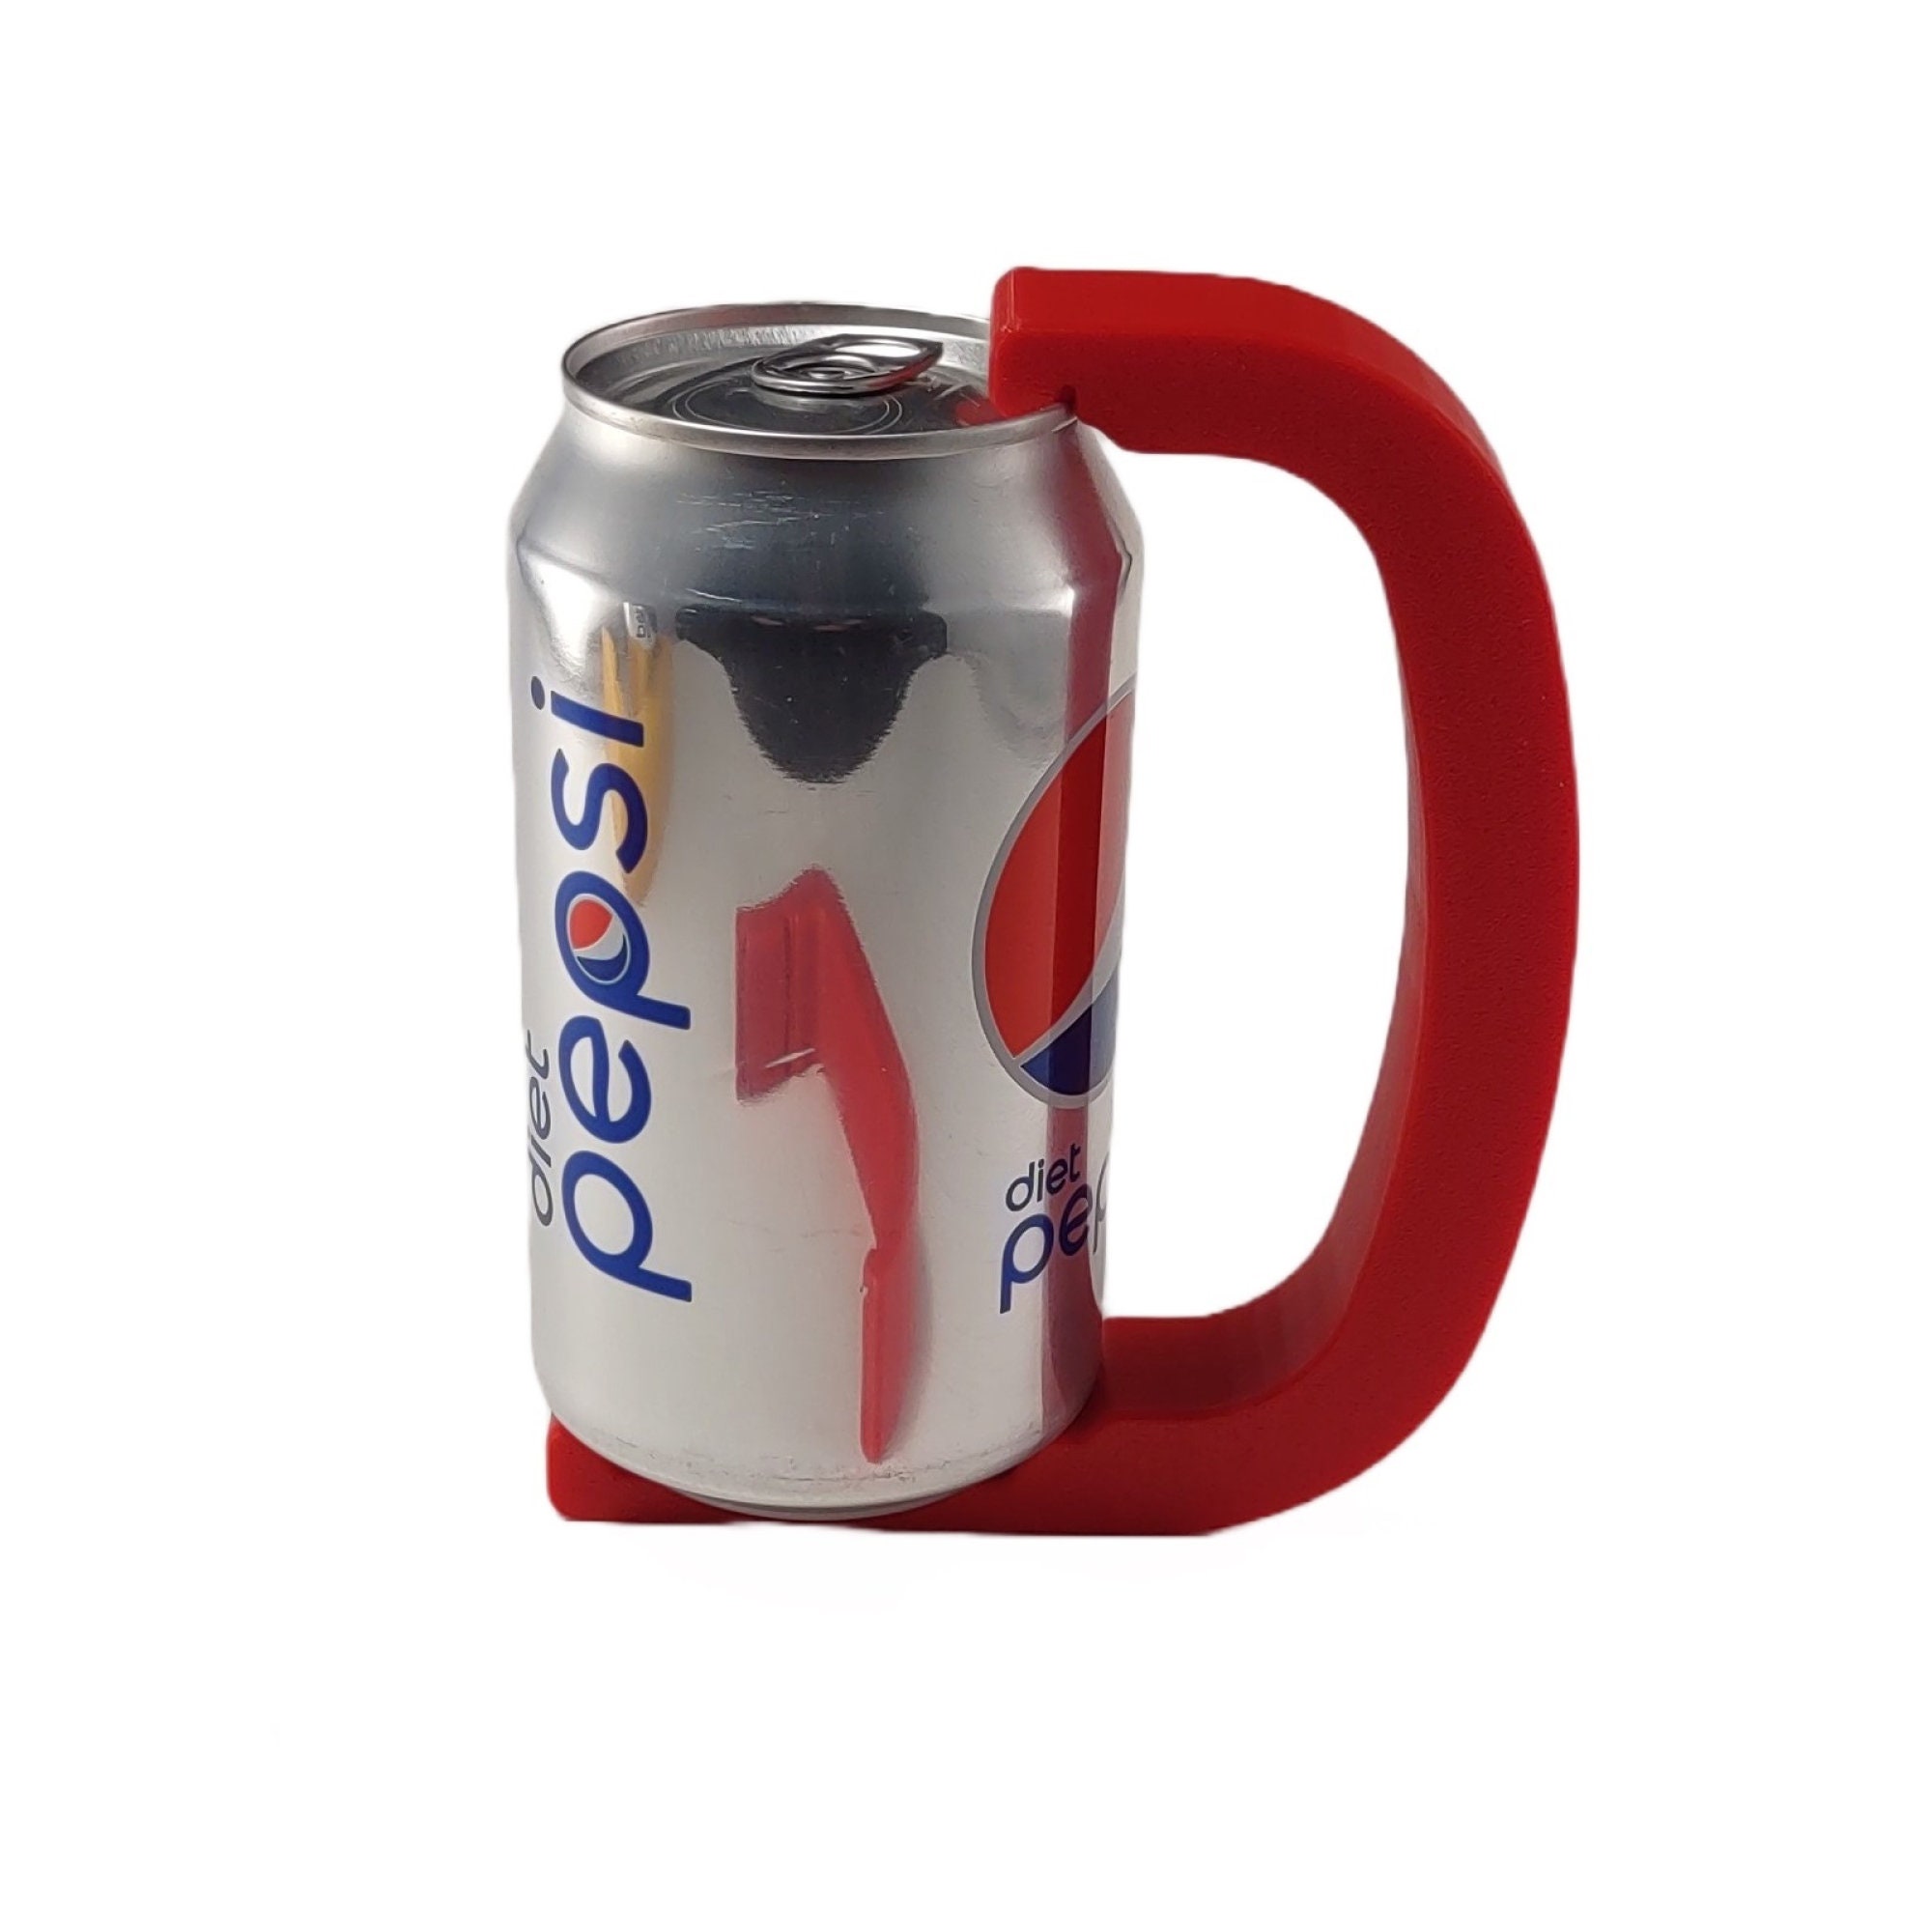 12 oz Beer Can / Soda Can Holder, Handle, Turn you Can into a Mug, Style B  Red